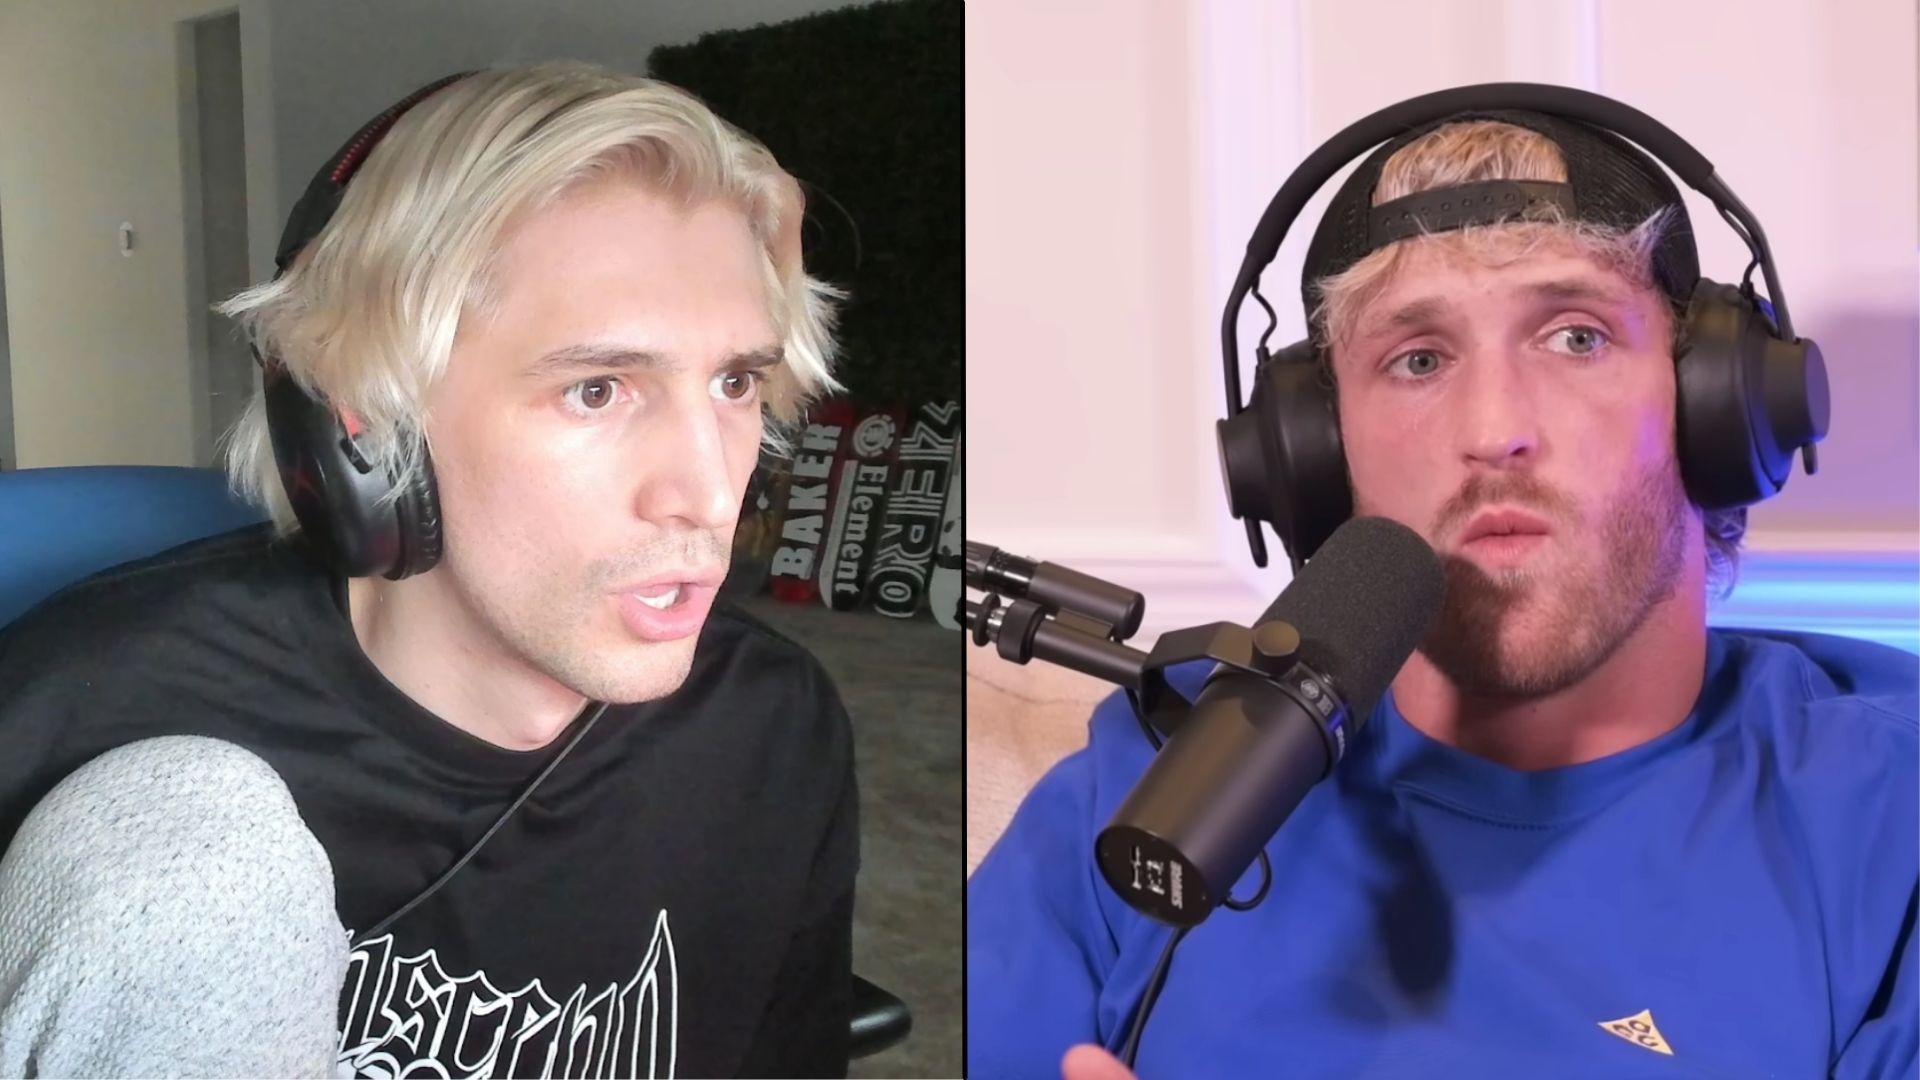 Logan Paul and xQc side-by-side talking into mics